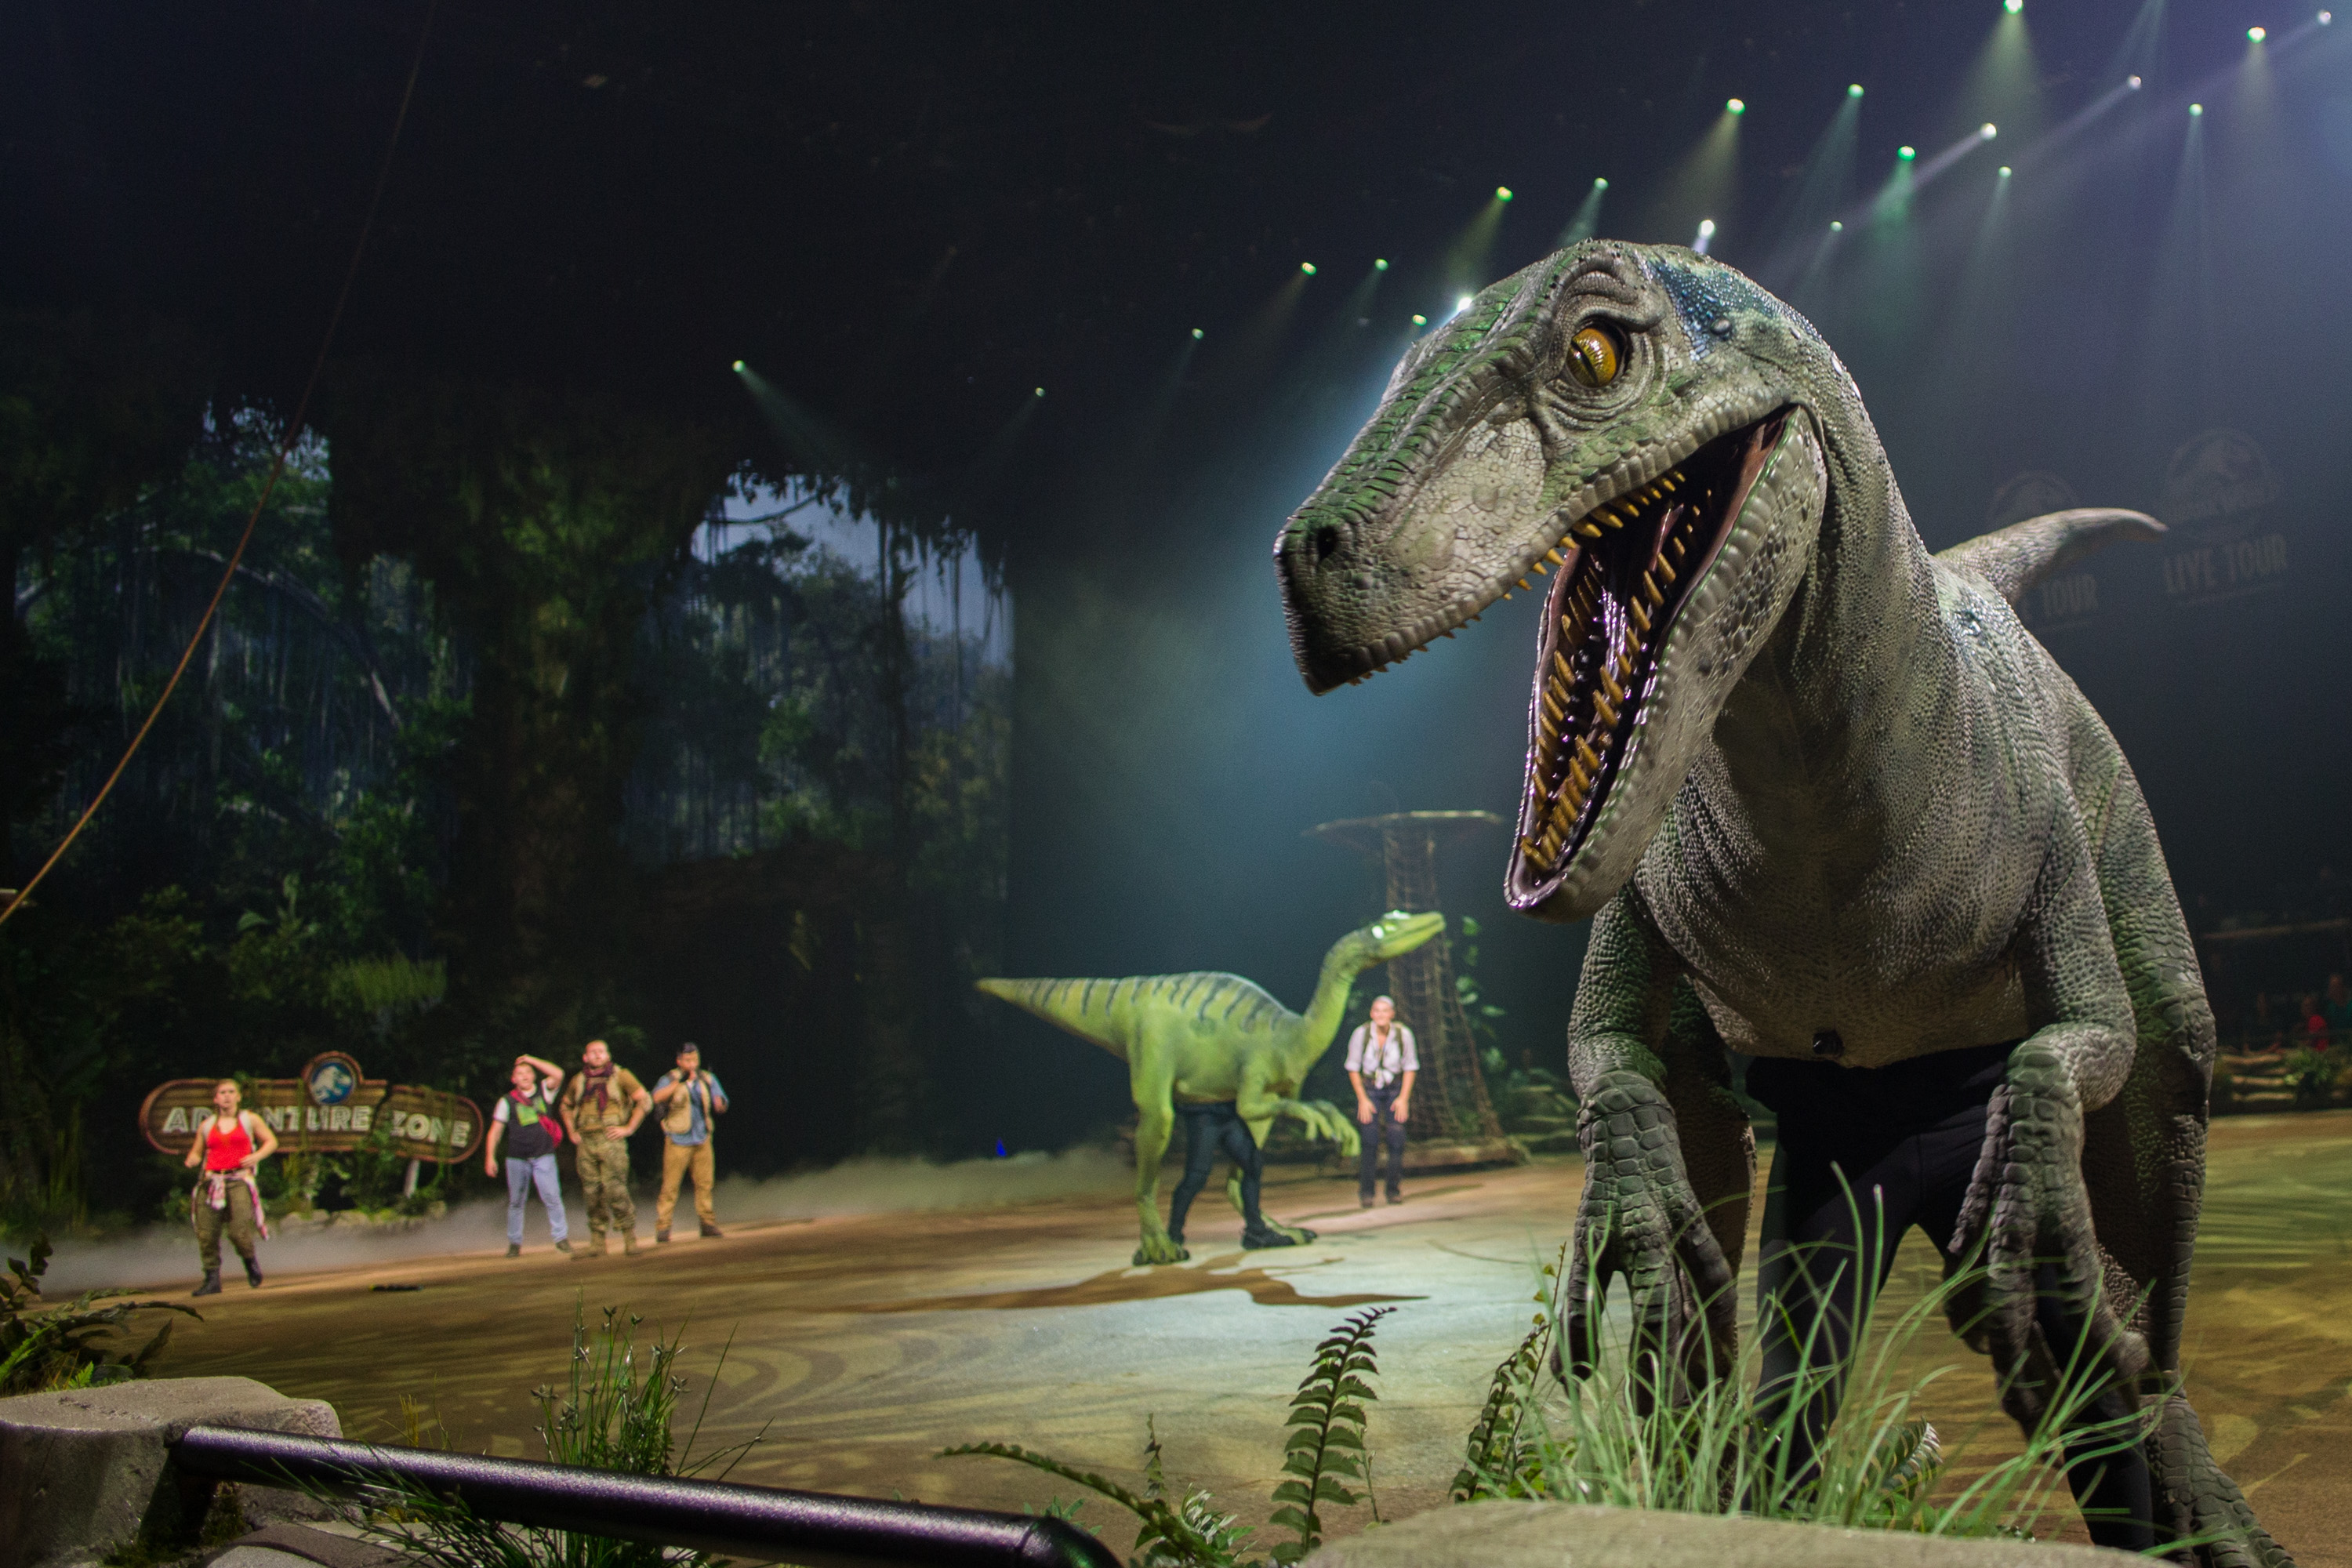 Jurassic World Live Tour comes to Montreal Sept. 8 to 10